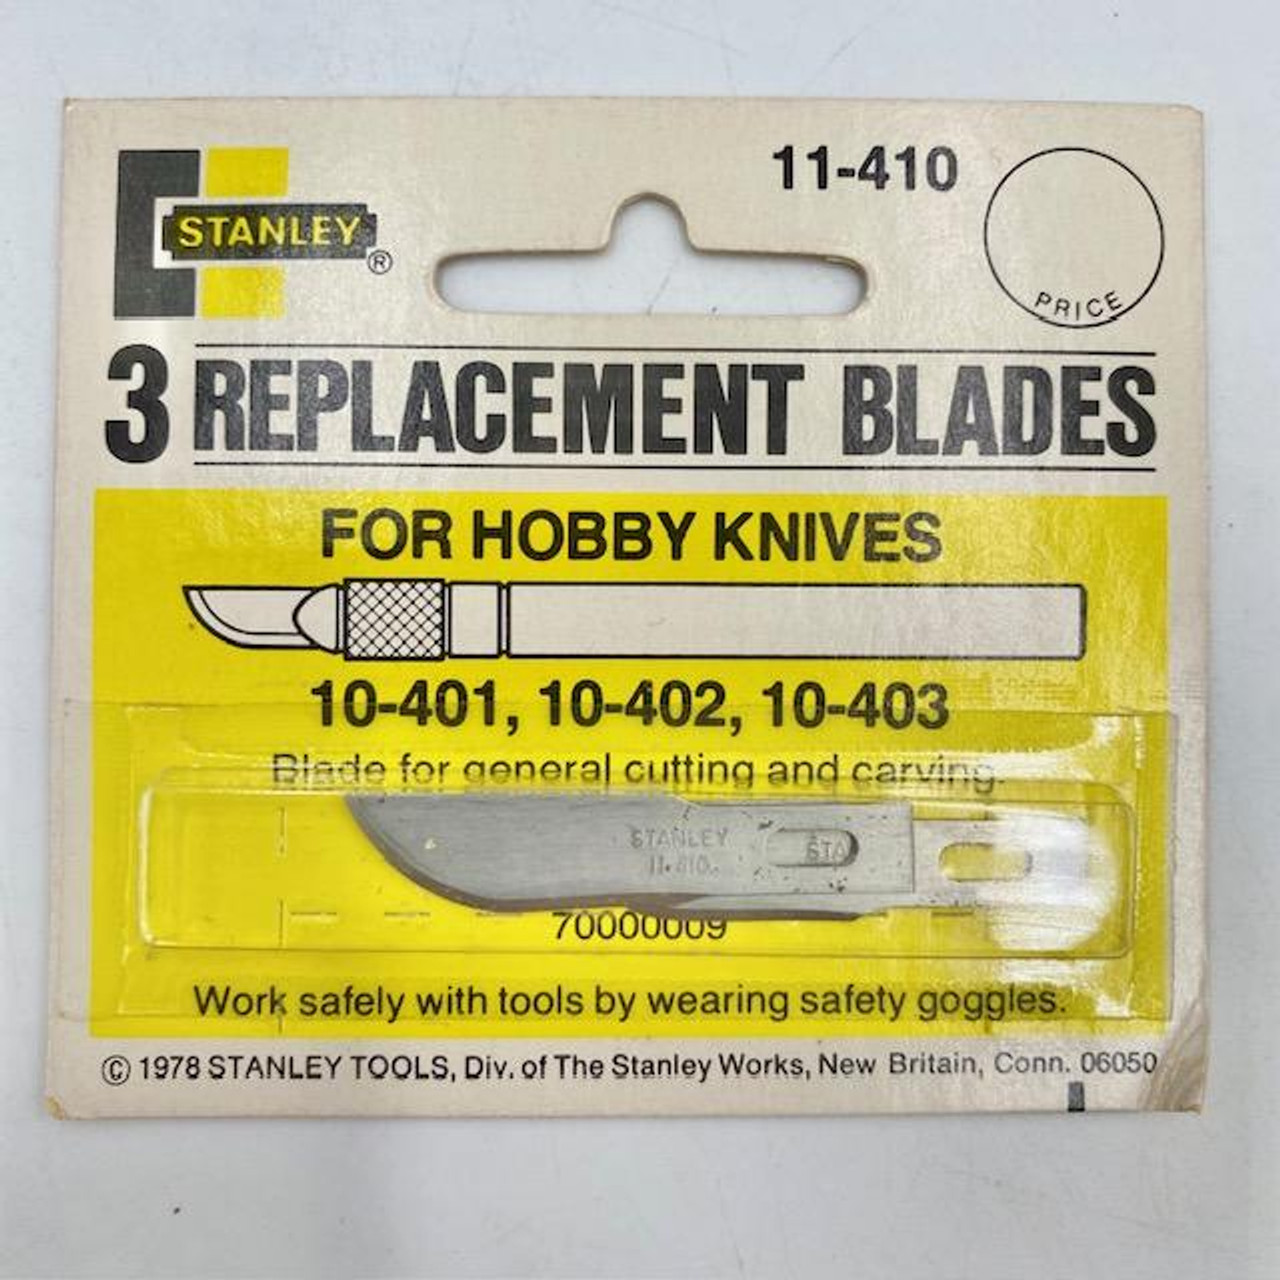 Vintage Stanley 11-410 Replacement Blades for Hobby Knives, 3 Blades, Made in U.S.A.